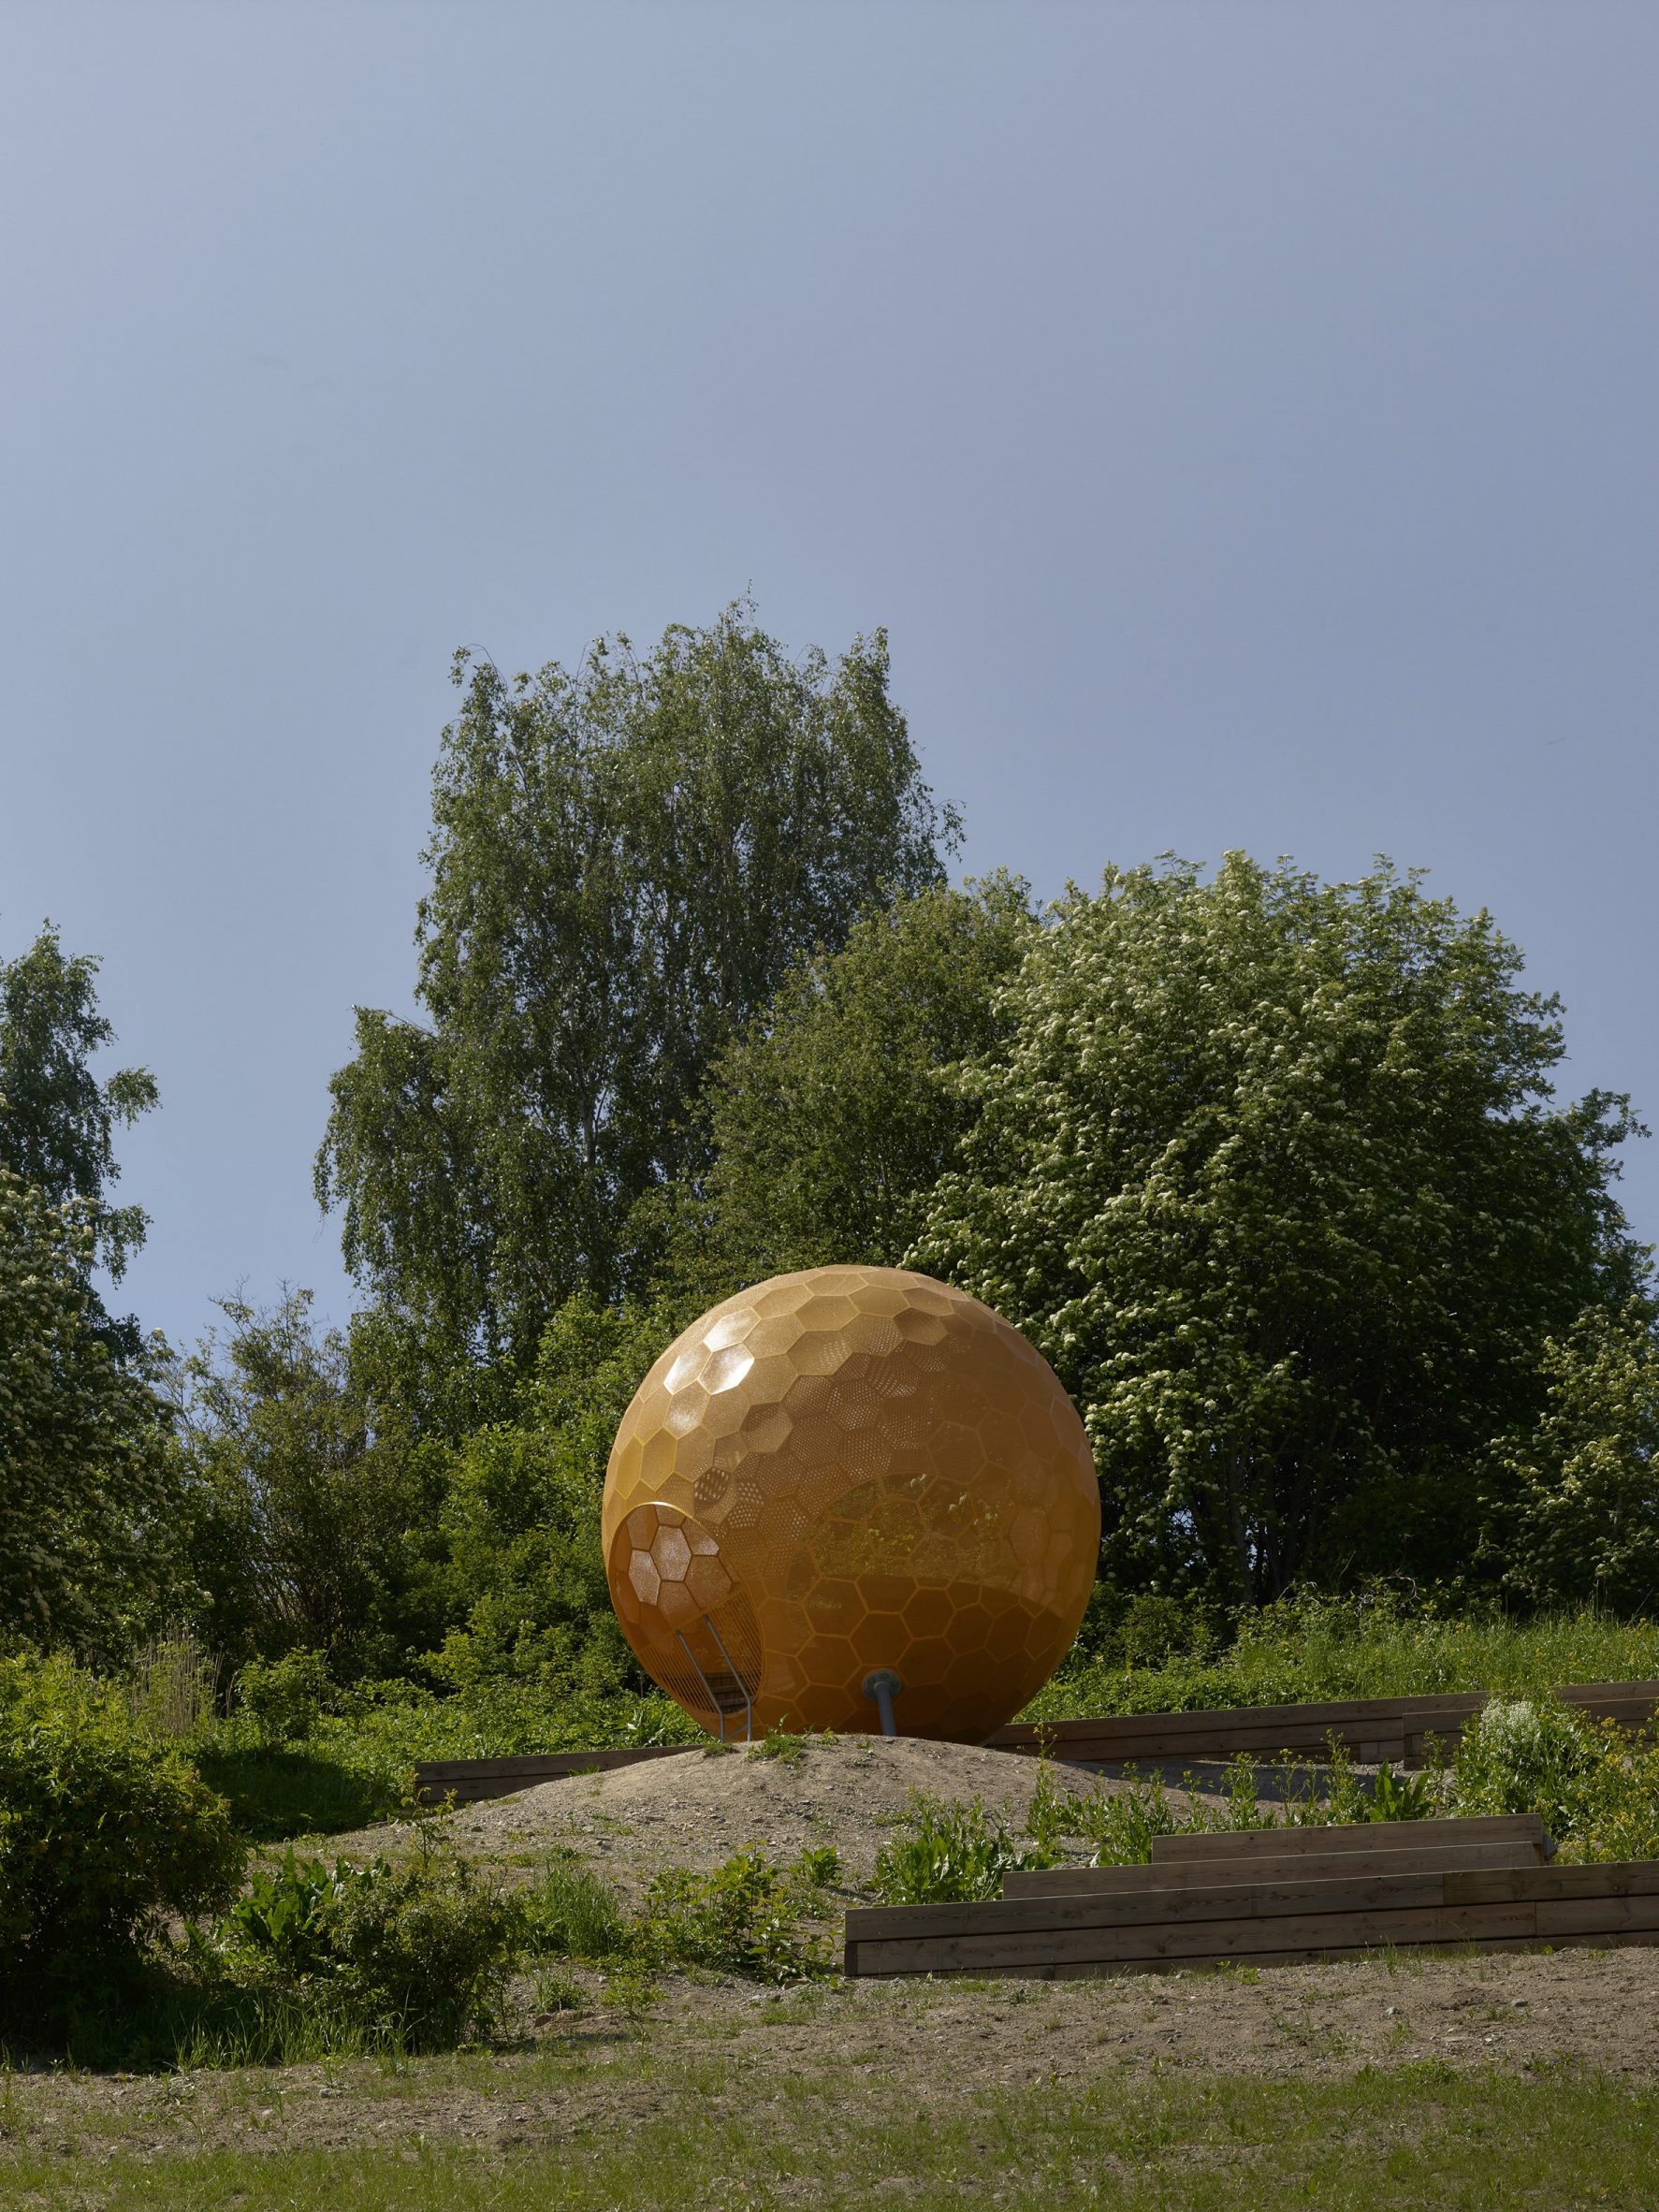 A perforated metal orange sphere at the top of the park